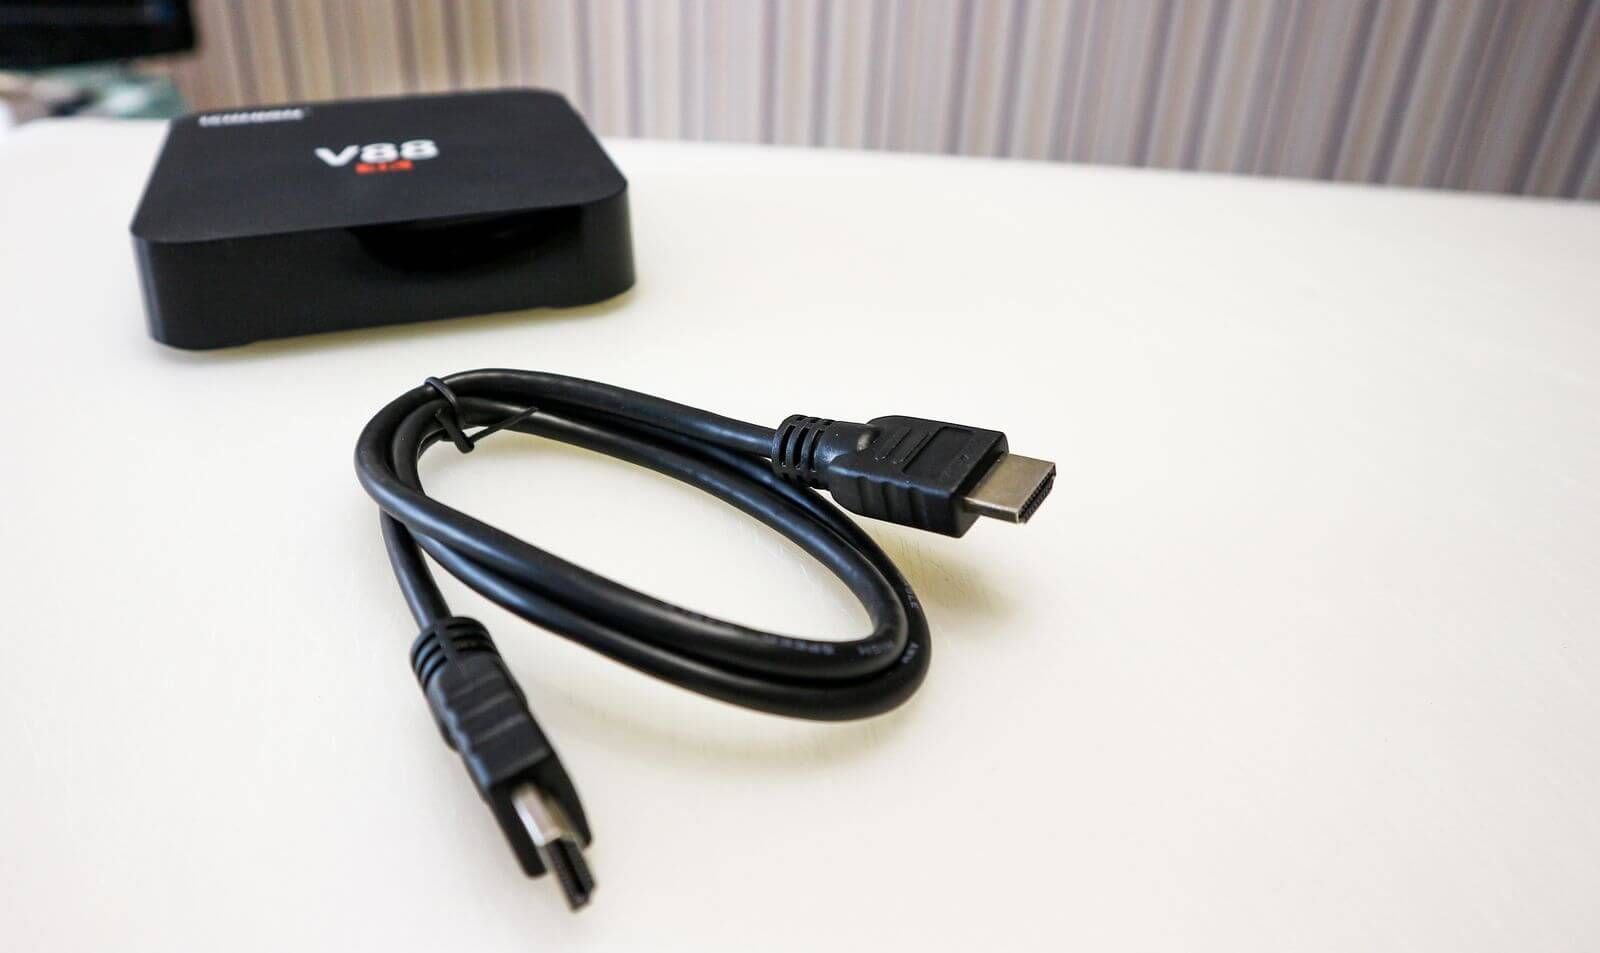 Review SCISHION V88: very cheap TV box with Android 5.1